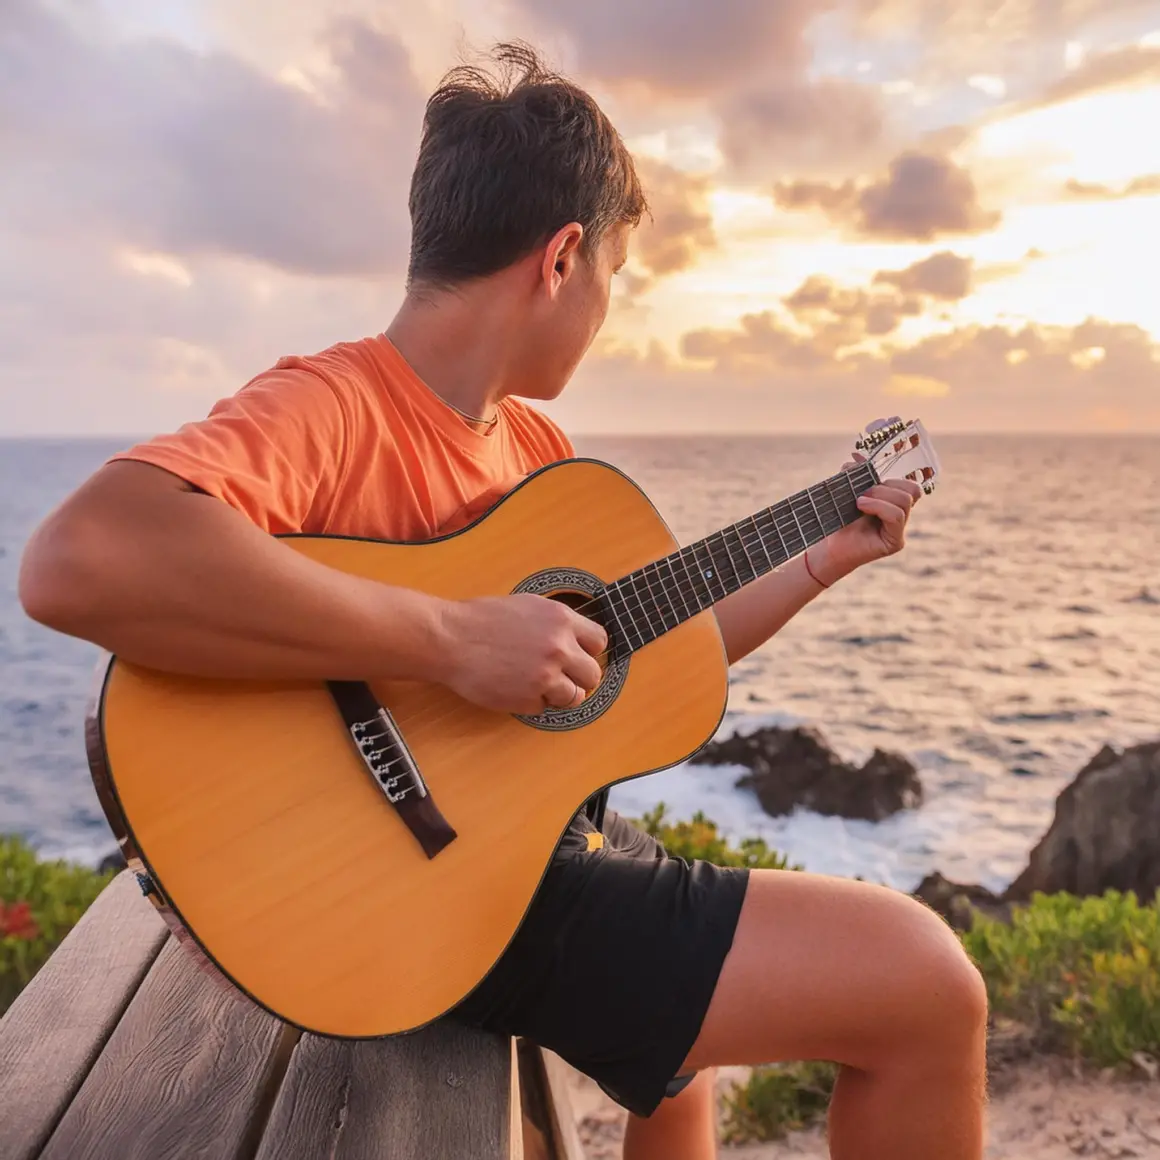 Man playing an acoustic guitar by ocean at sunset prompt output 2